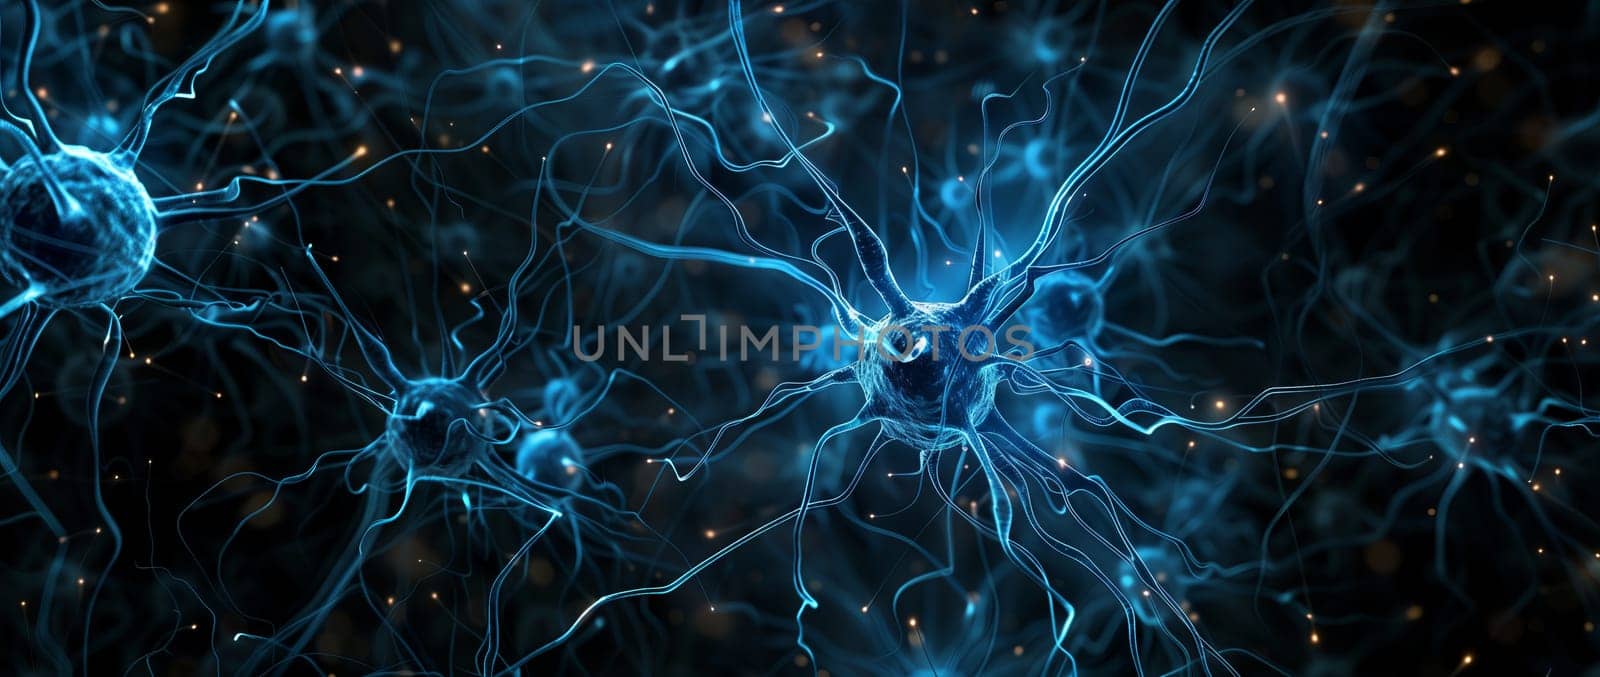 An electric blue image of brain neurons akin to an astronomical object in space by richwolf